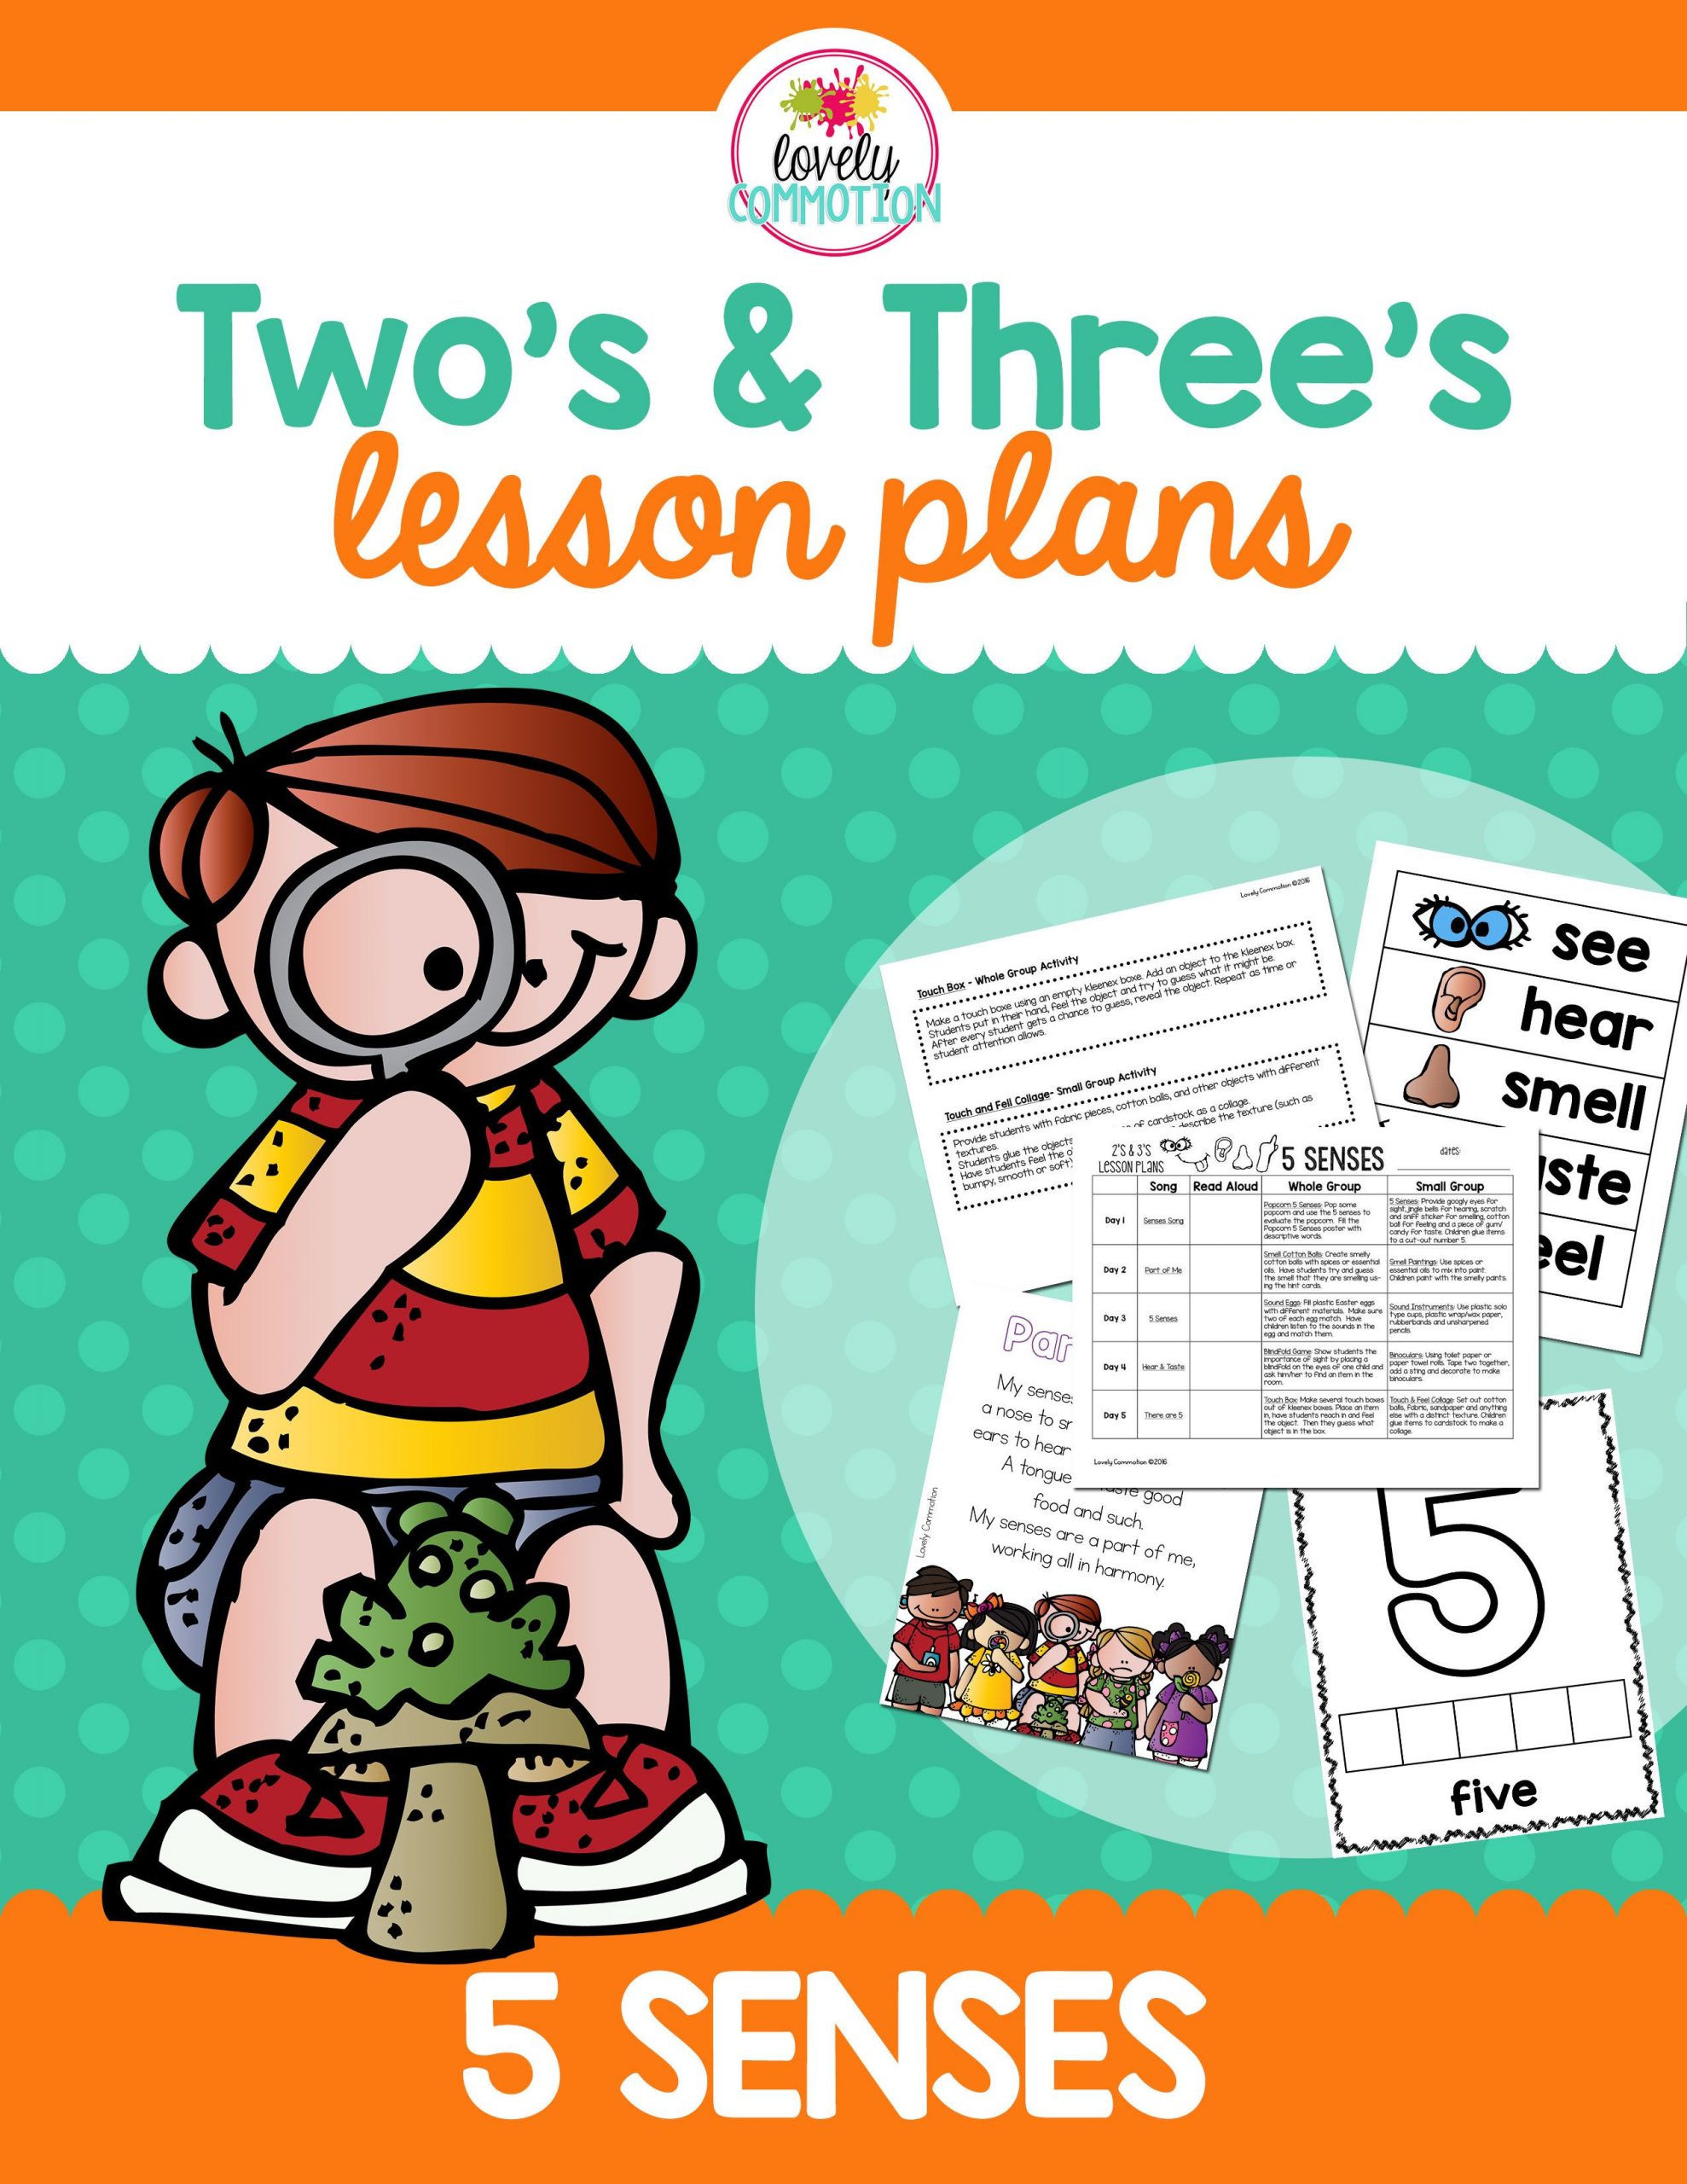 Five Senses Lesson Plan 5 Senses Lesson Plan for 2 and 3 Year Olds